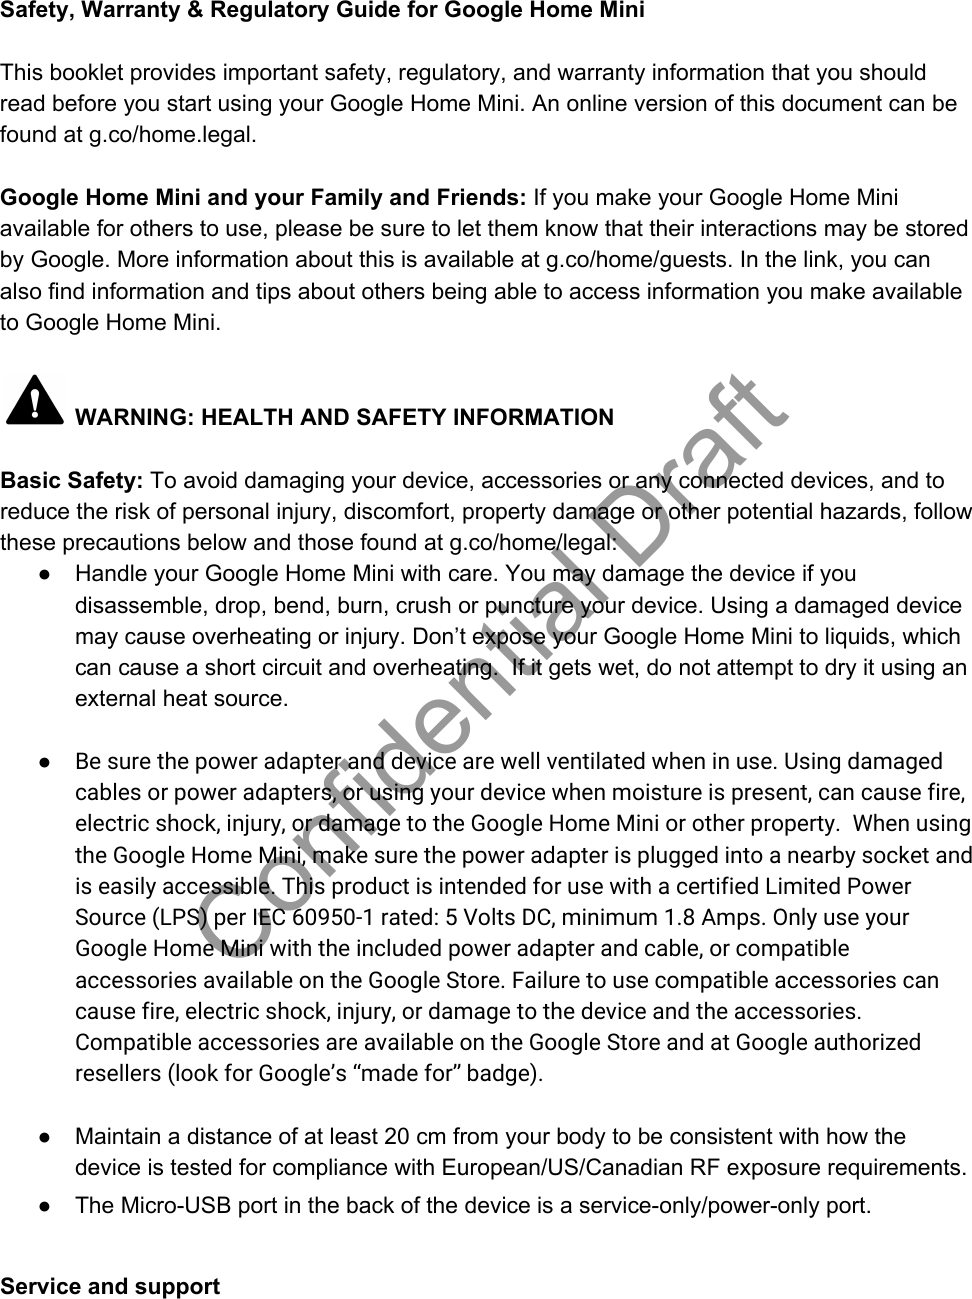 Safety, Warranty &amp; Regulatory Guide for Google Home Mini  This booklet provides important safety, regulatory, and warranty information that you should read before you start using your Google Home Mini. An online version of this document can be found at g.co/home.legal.  Google Home Mini and your Family and Friends: If you make your Google Home Mini available for others to use, please be sure to let them know that their interactions may be stored by Google. More information about this is available at g.co/home/guests. In the link, you can also find information and tips about others being able to access information you make available to Google Home Mini.   WARNING: HEALTH AND SAFETY INFORMATION  Basic Safety: To avoid damaging your device, accessories or any connected devices, and to reduce the risk of personal injury, discomfort, property damage or other potential hazards, follow these precautions below and those found at g.co/home/legal: ● Handle your Google Home Mini with care. You may damage the device if you disassemble, drop, bend, burn, crush or puncture your device. Using a damaged device may cause overheating or injury. Don’t expose your Google Home Mini to liquids, which can cause a short circuit and overheating.  If it gets wet, do not attempt to dry it using an external heat source.   ●Be sure the power adapter and device are well ventilated when in use. Using damagedcables or power adapters, or using your device when moisture is present, can cause fire,electric shock, injury, or damage to the Google Home Mini or other property.  When usingthe Google Home Mini, make sure the power adapter is plugged into a nearby socket andis easily accessible. This product is intended for use with a certified Limited PowerSource (LPS) per IEC 60950-1 rated: 5 Volts DC, minimum 1.8 Amps. Only use yourGoogle Home Mini with the included power adapter and cable, or compatibleaccessories available on the Google Store. Failure to use compatible accessories cancause fire, electric shock, injury, or damage to the device and the accessories.Compatible accessories are available on the Google Store and at Google authorizedresellers (look for Google’s “made for” badge). ● Maintain a distance of at least 20 cm from your body to be consistent with how the device is tested for compliance with European/US/Canadian RF exposure requirements. ● The Micro-USB port in the back of the device is a service-only/power-only port.   Service and support Confidential Draft